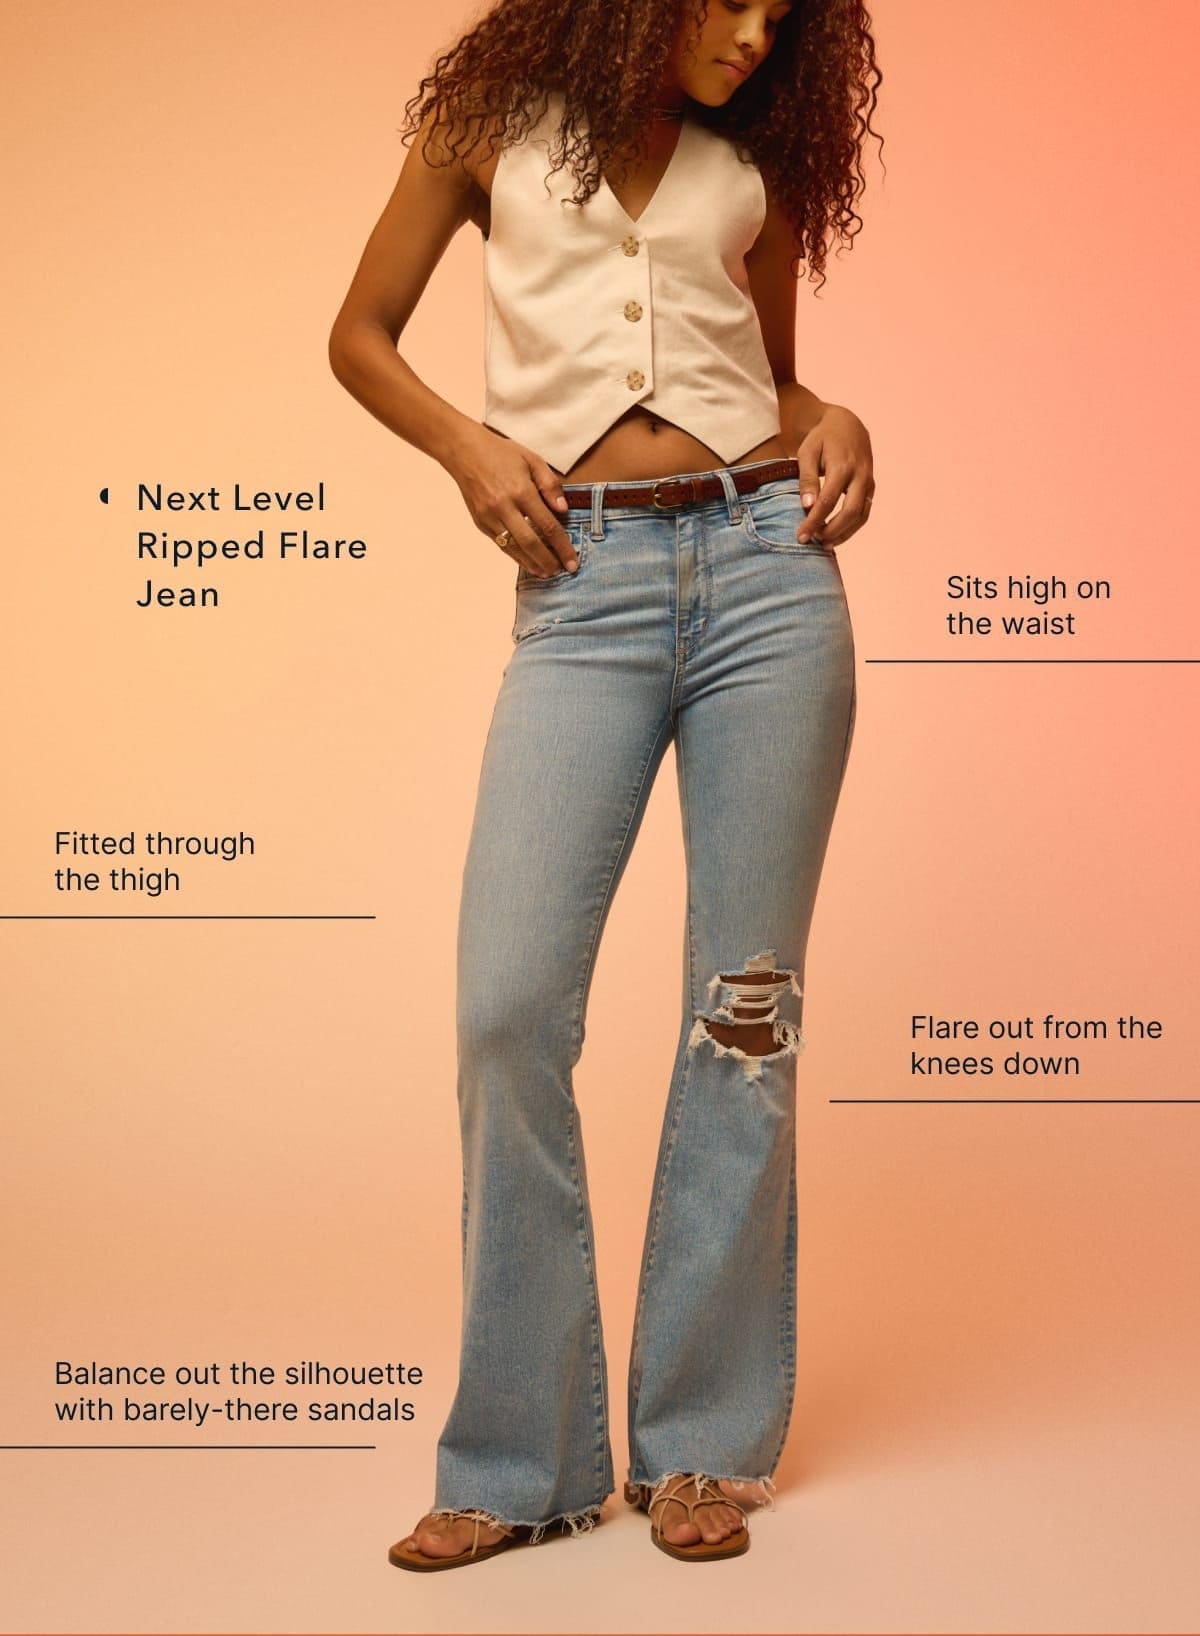 Next Level Ripped Flare Jean | Sits high on the waist | Fitted through the thigh | Flare out from the knees down | Balance out the silhouette with barely-there sandals